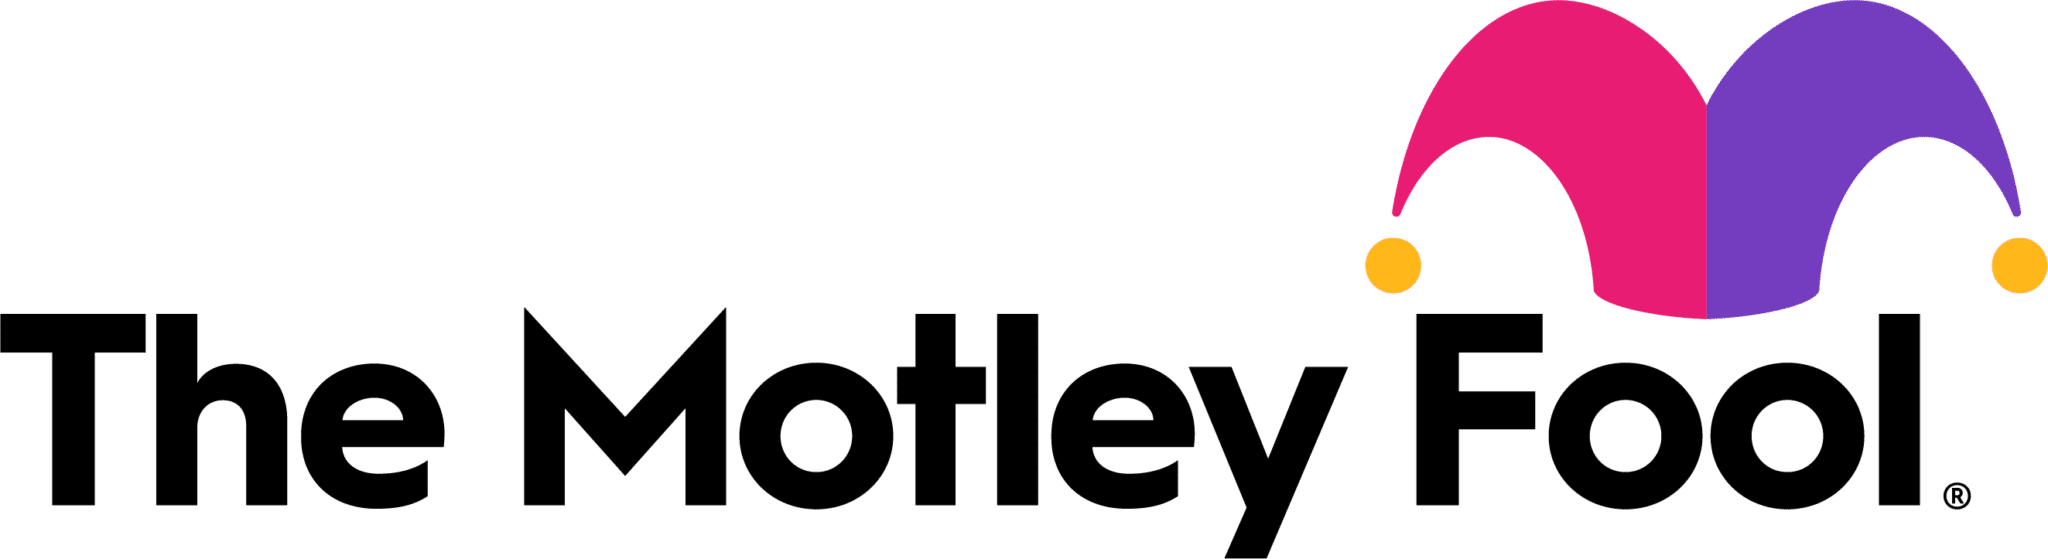 Motley Fool Stock Advisor Review 2021 - Is the Subscription Worth It?